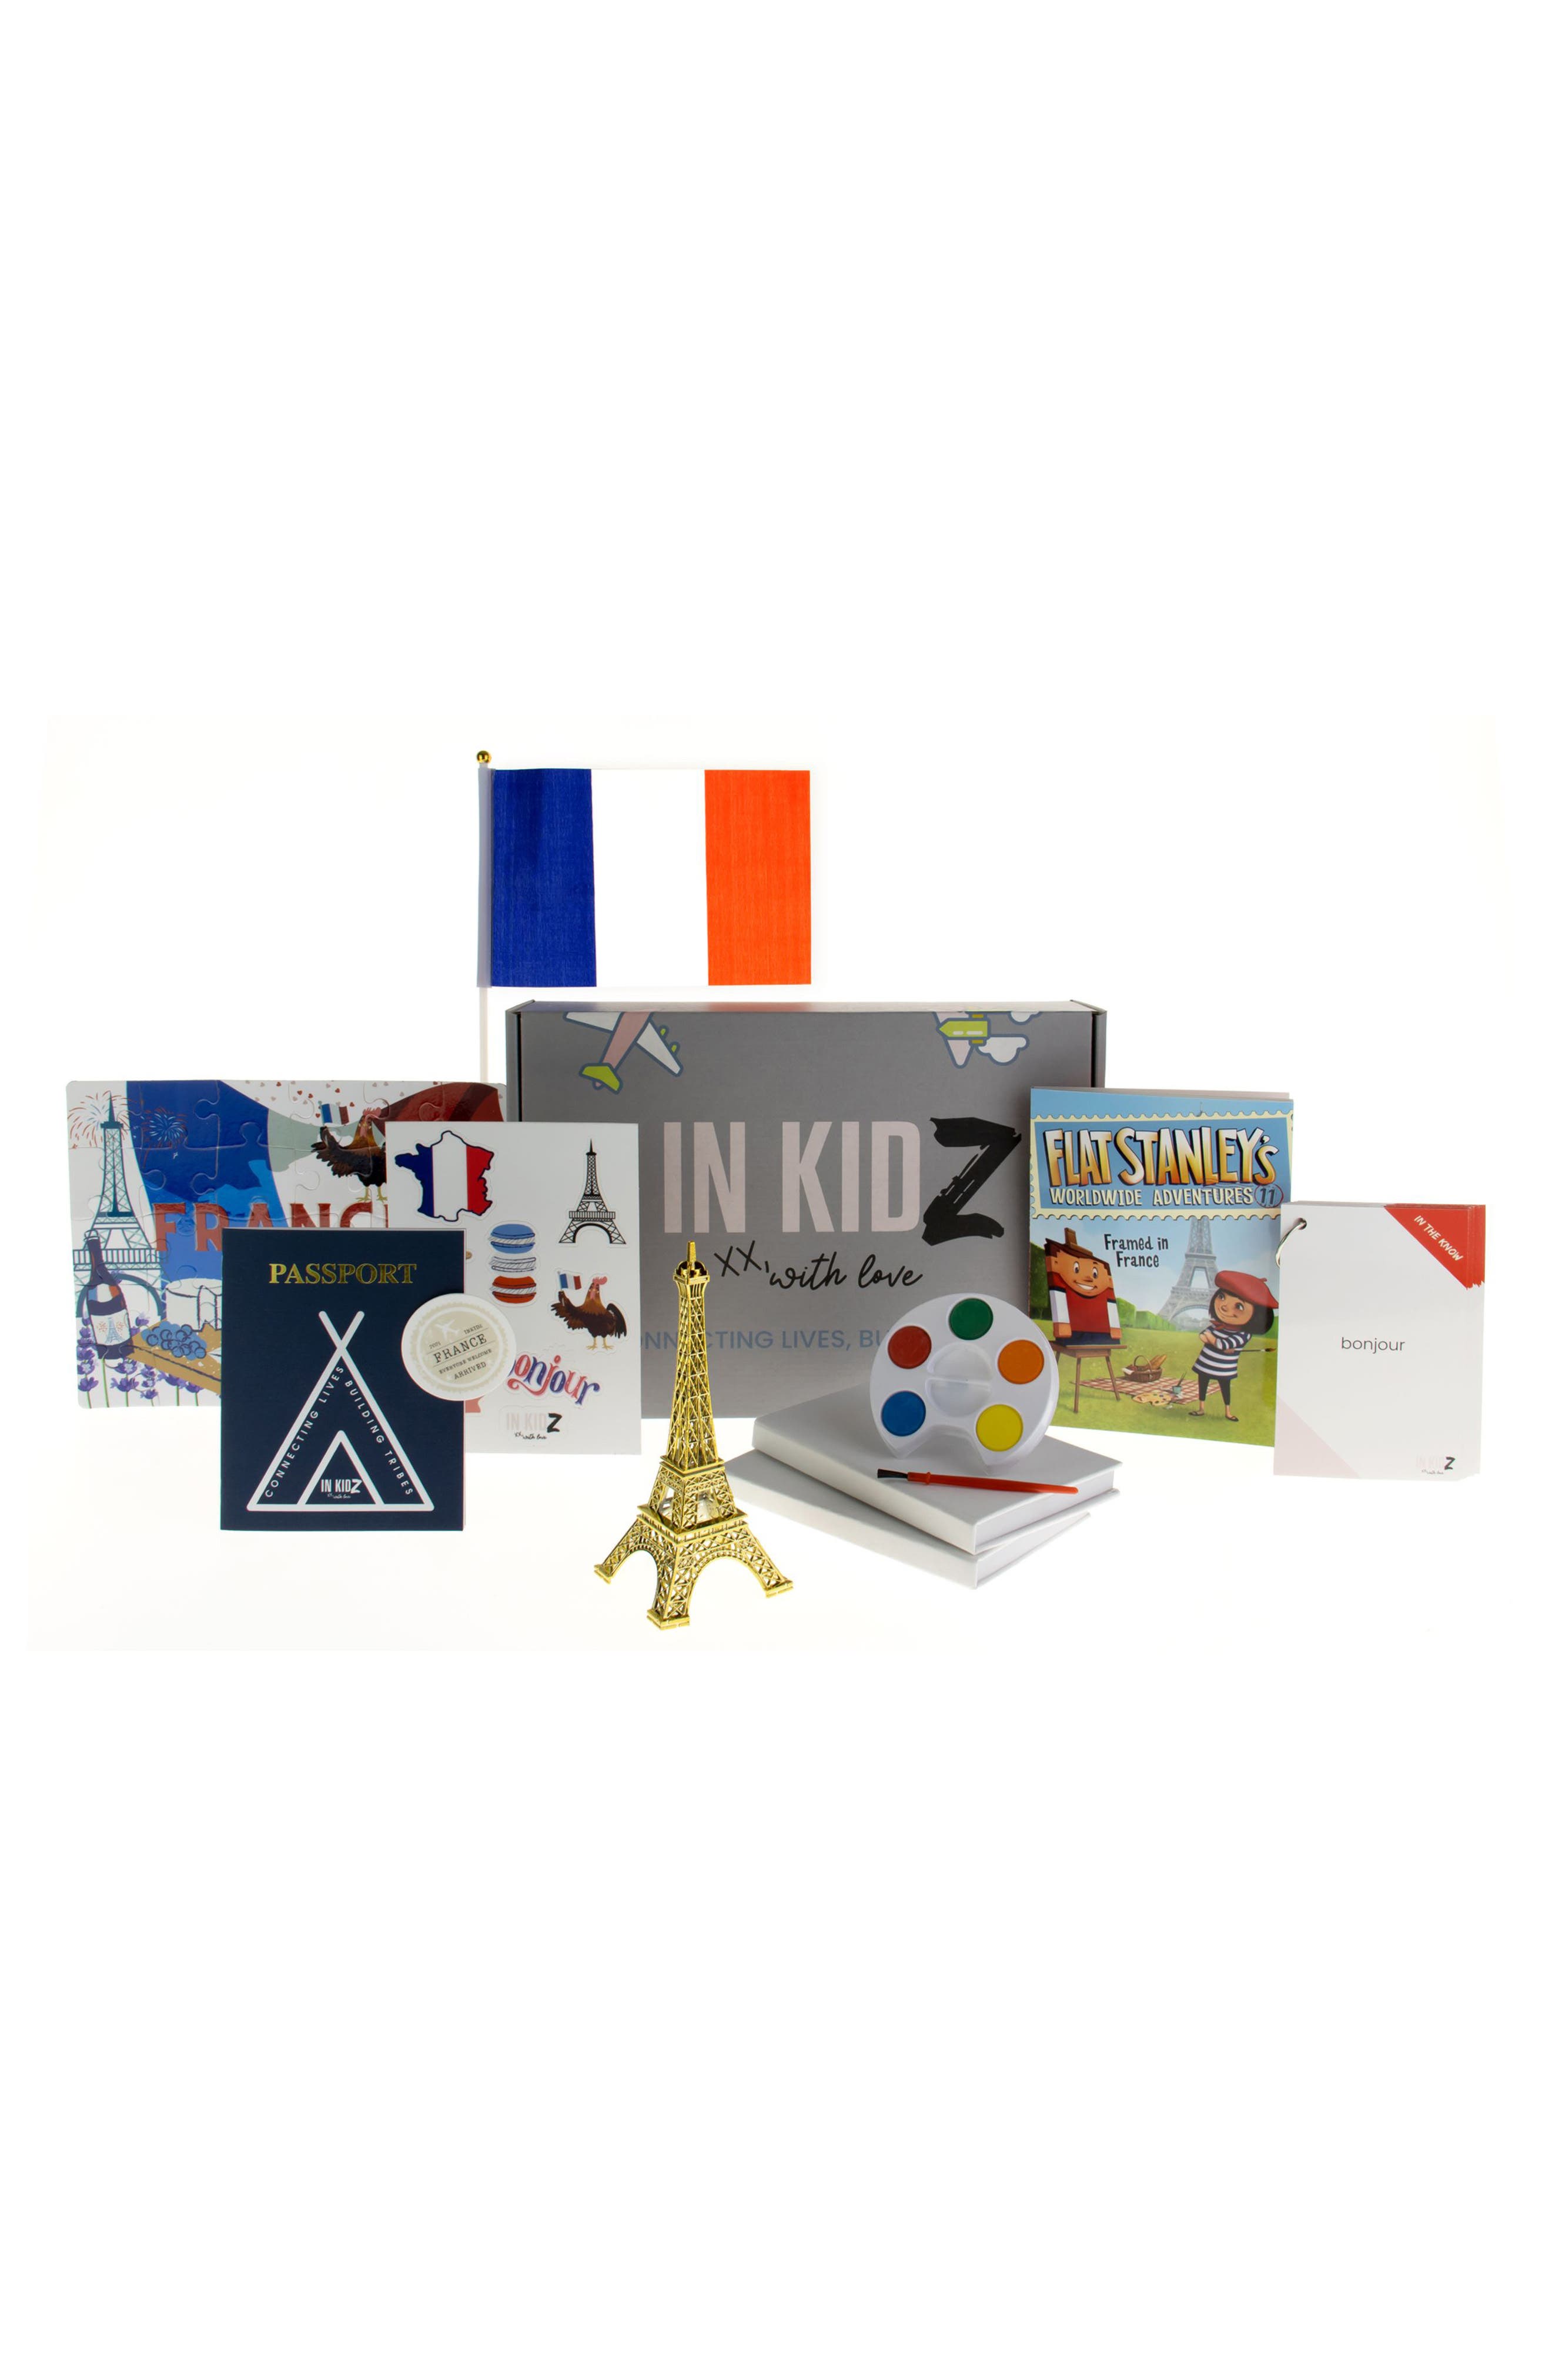 FRANCE CULTURE BOX for kids